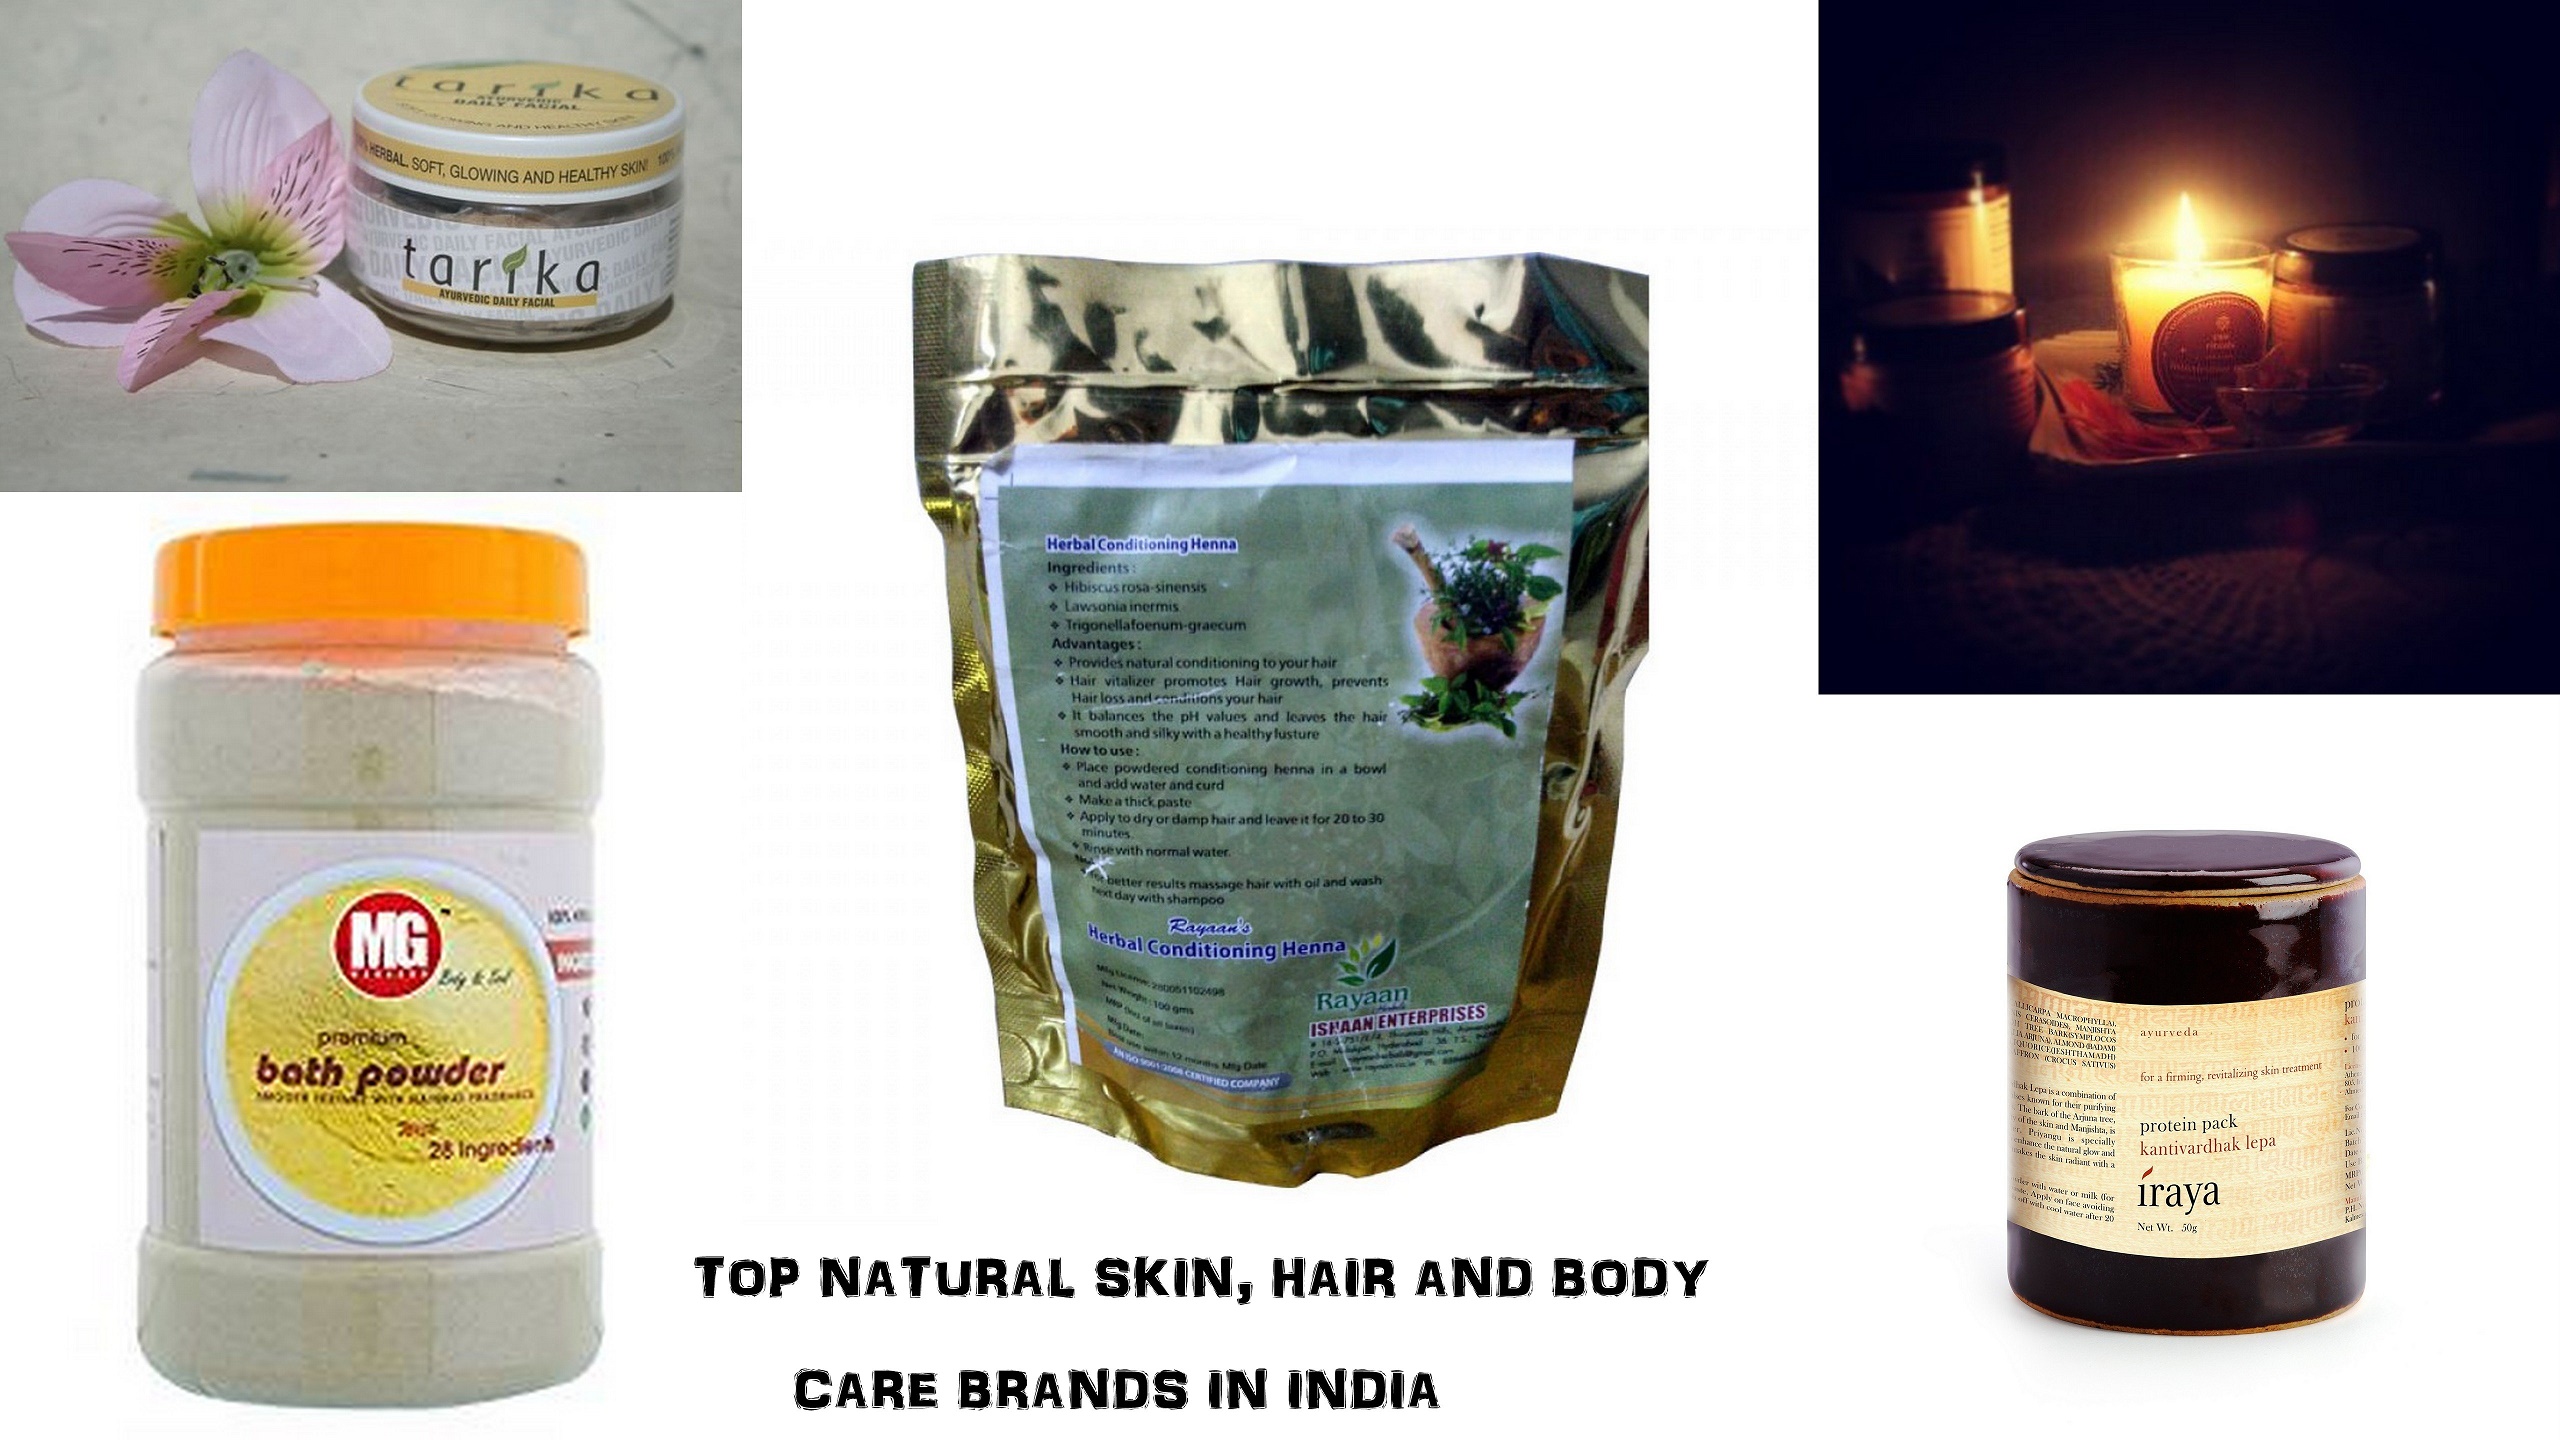 Top Natural Skin, Hair and Body Care Brands in India